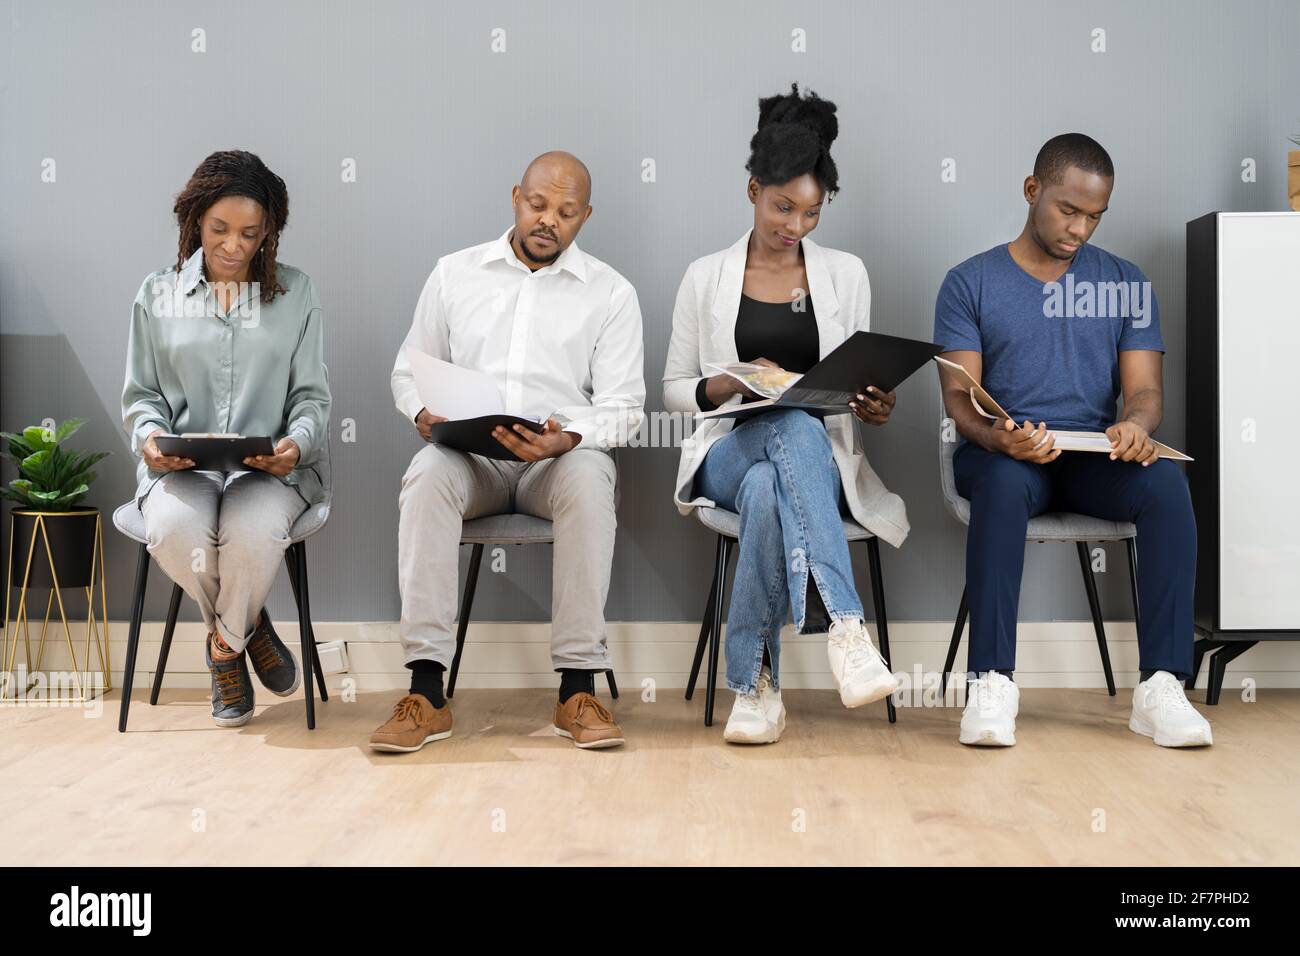 African American Unemployed Job Applicants Waiting In Line Stock Photo